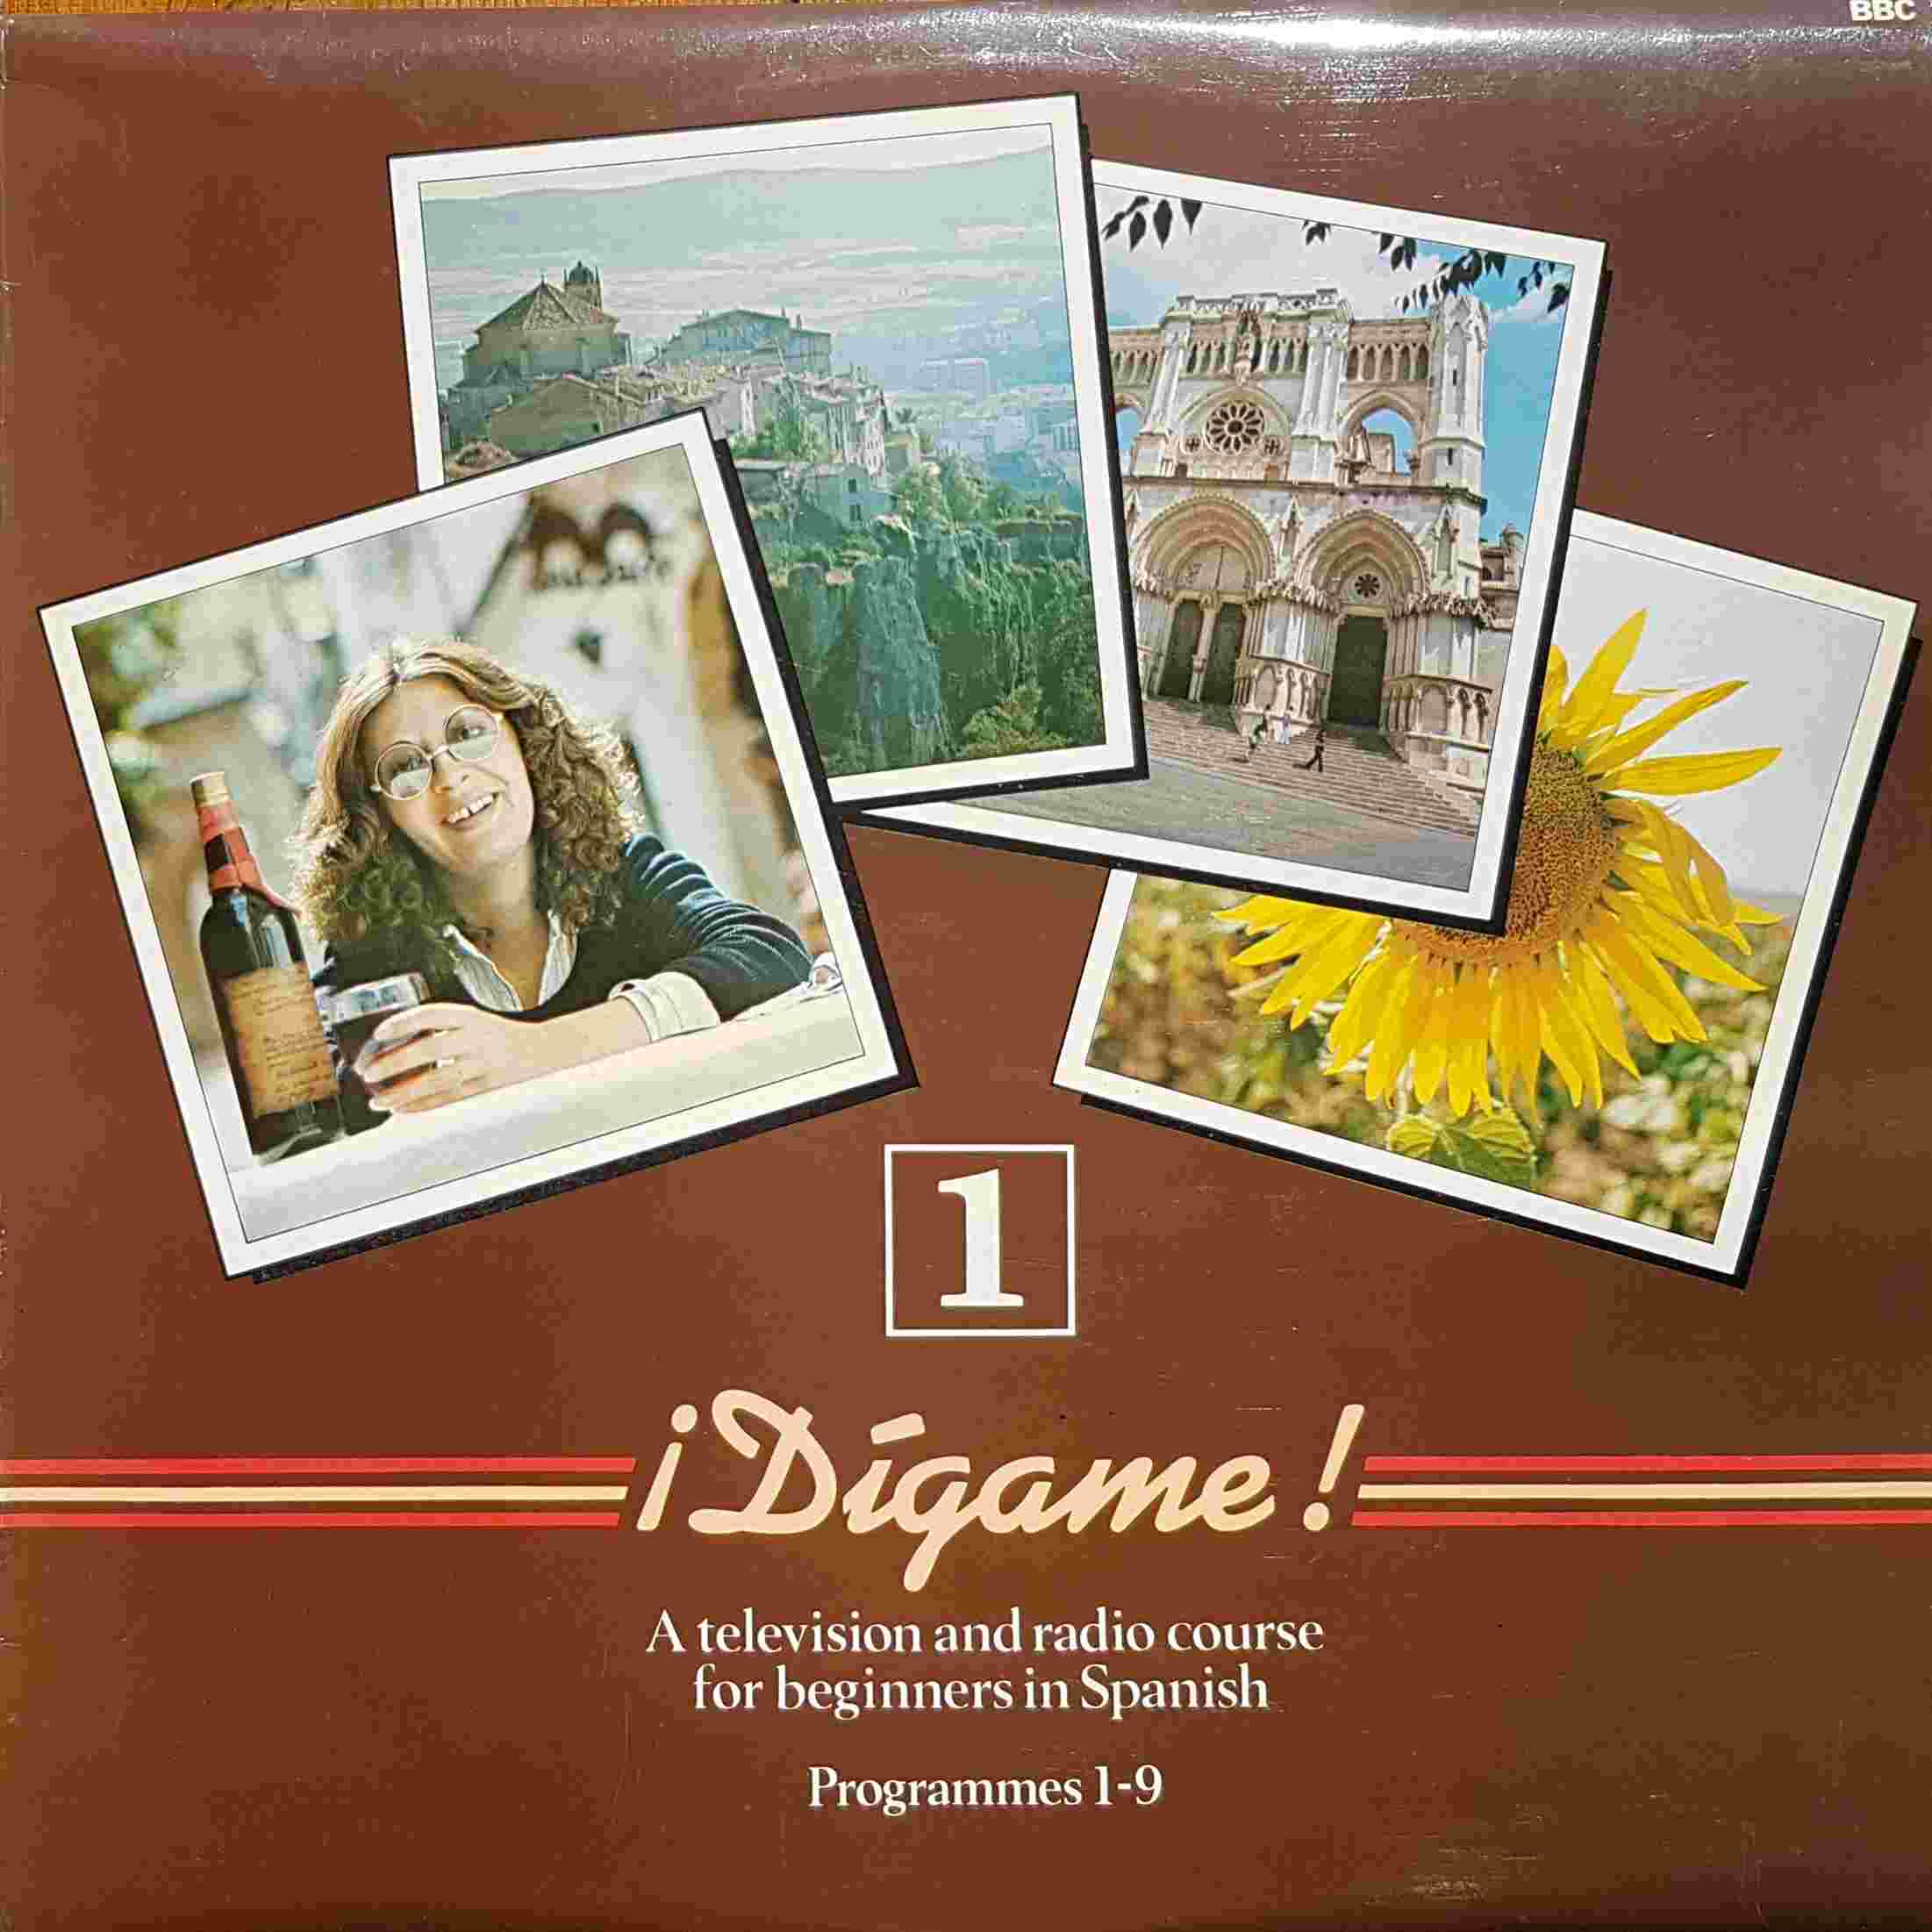 Picture of OP 230 Digame ! 1 - A television and radio course for beginners in Spanish - Programmes 1 - 9 by artist Various from the BBC albums - Records and Tapes library